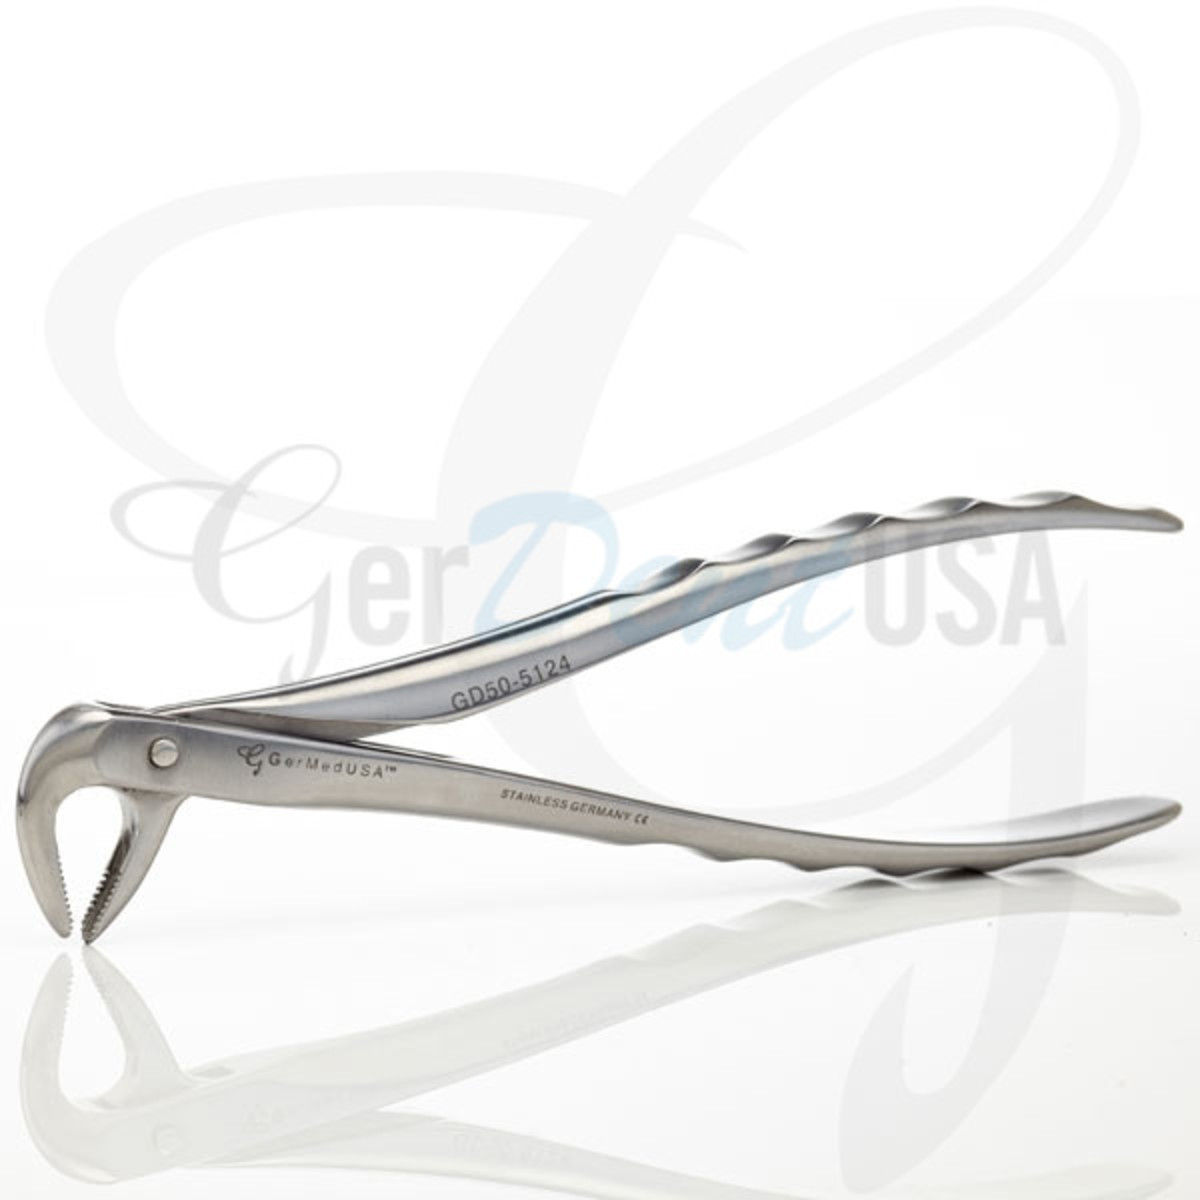 you-should-know-about-dental-forceps